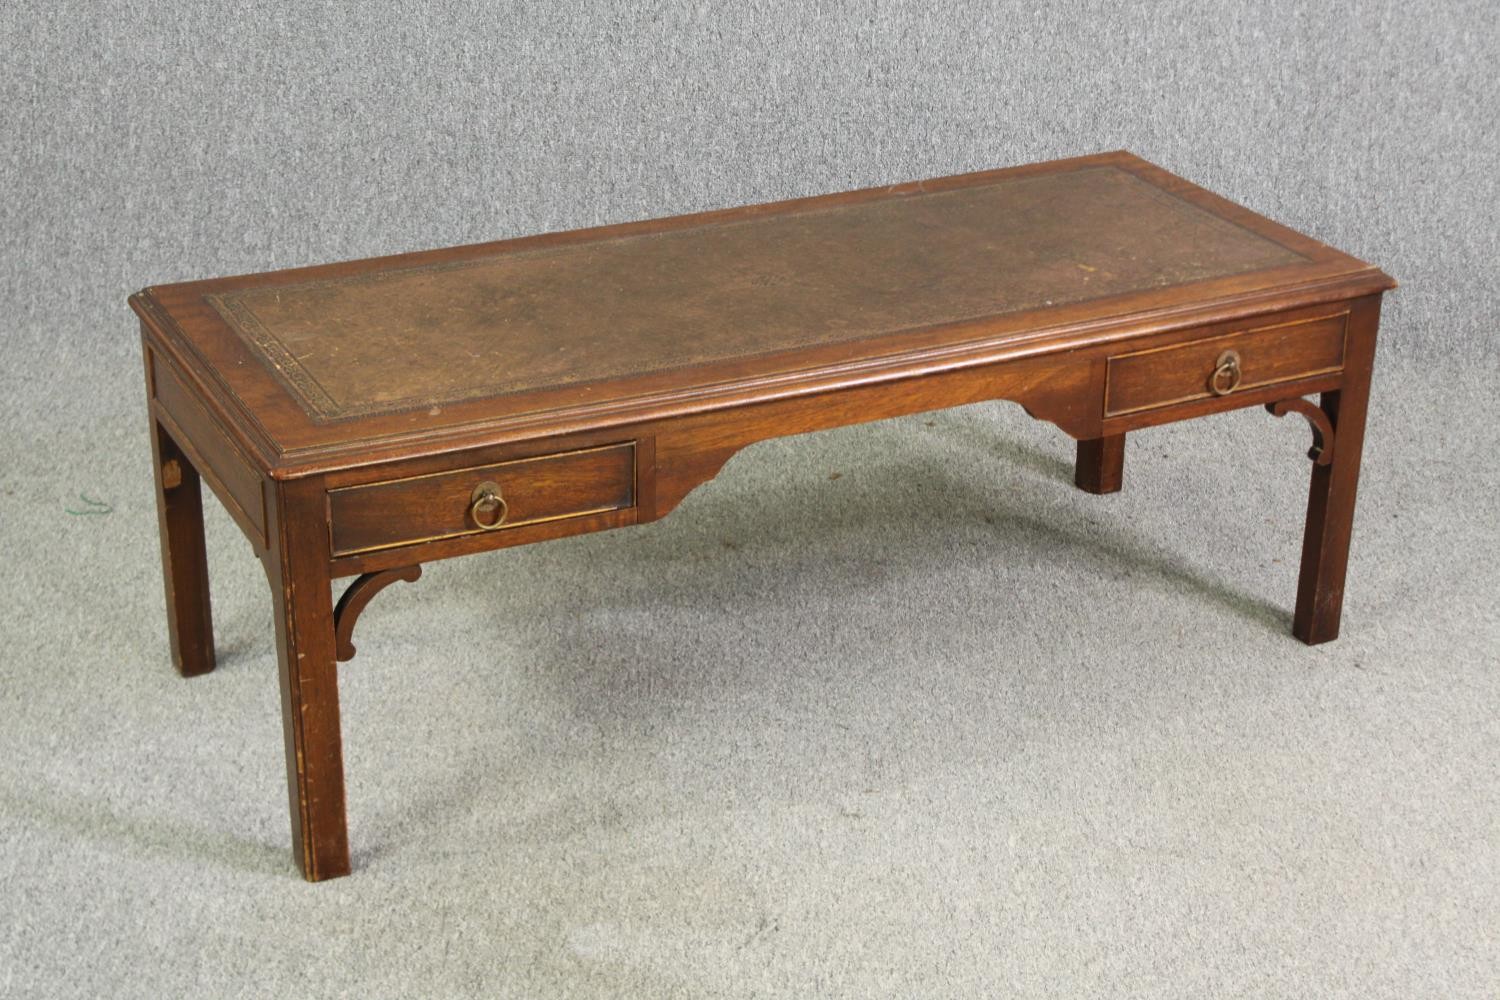 A mahogany coffee table, 20th century Georgian style. H.45 W.123 D.52cm. - Image 2 of 9